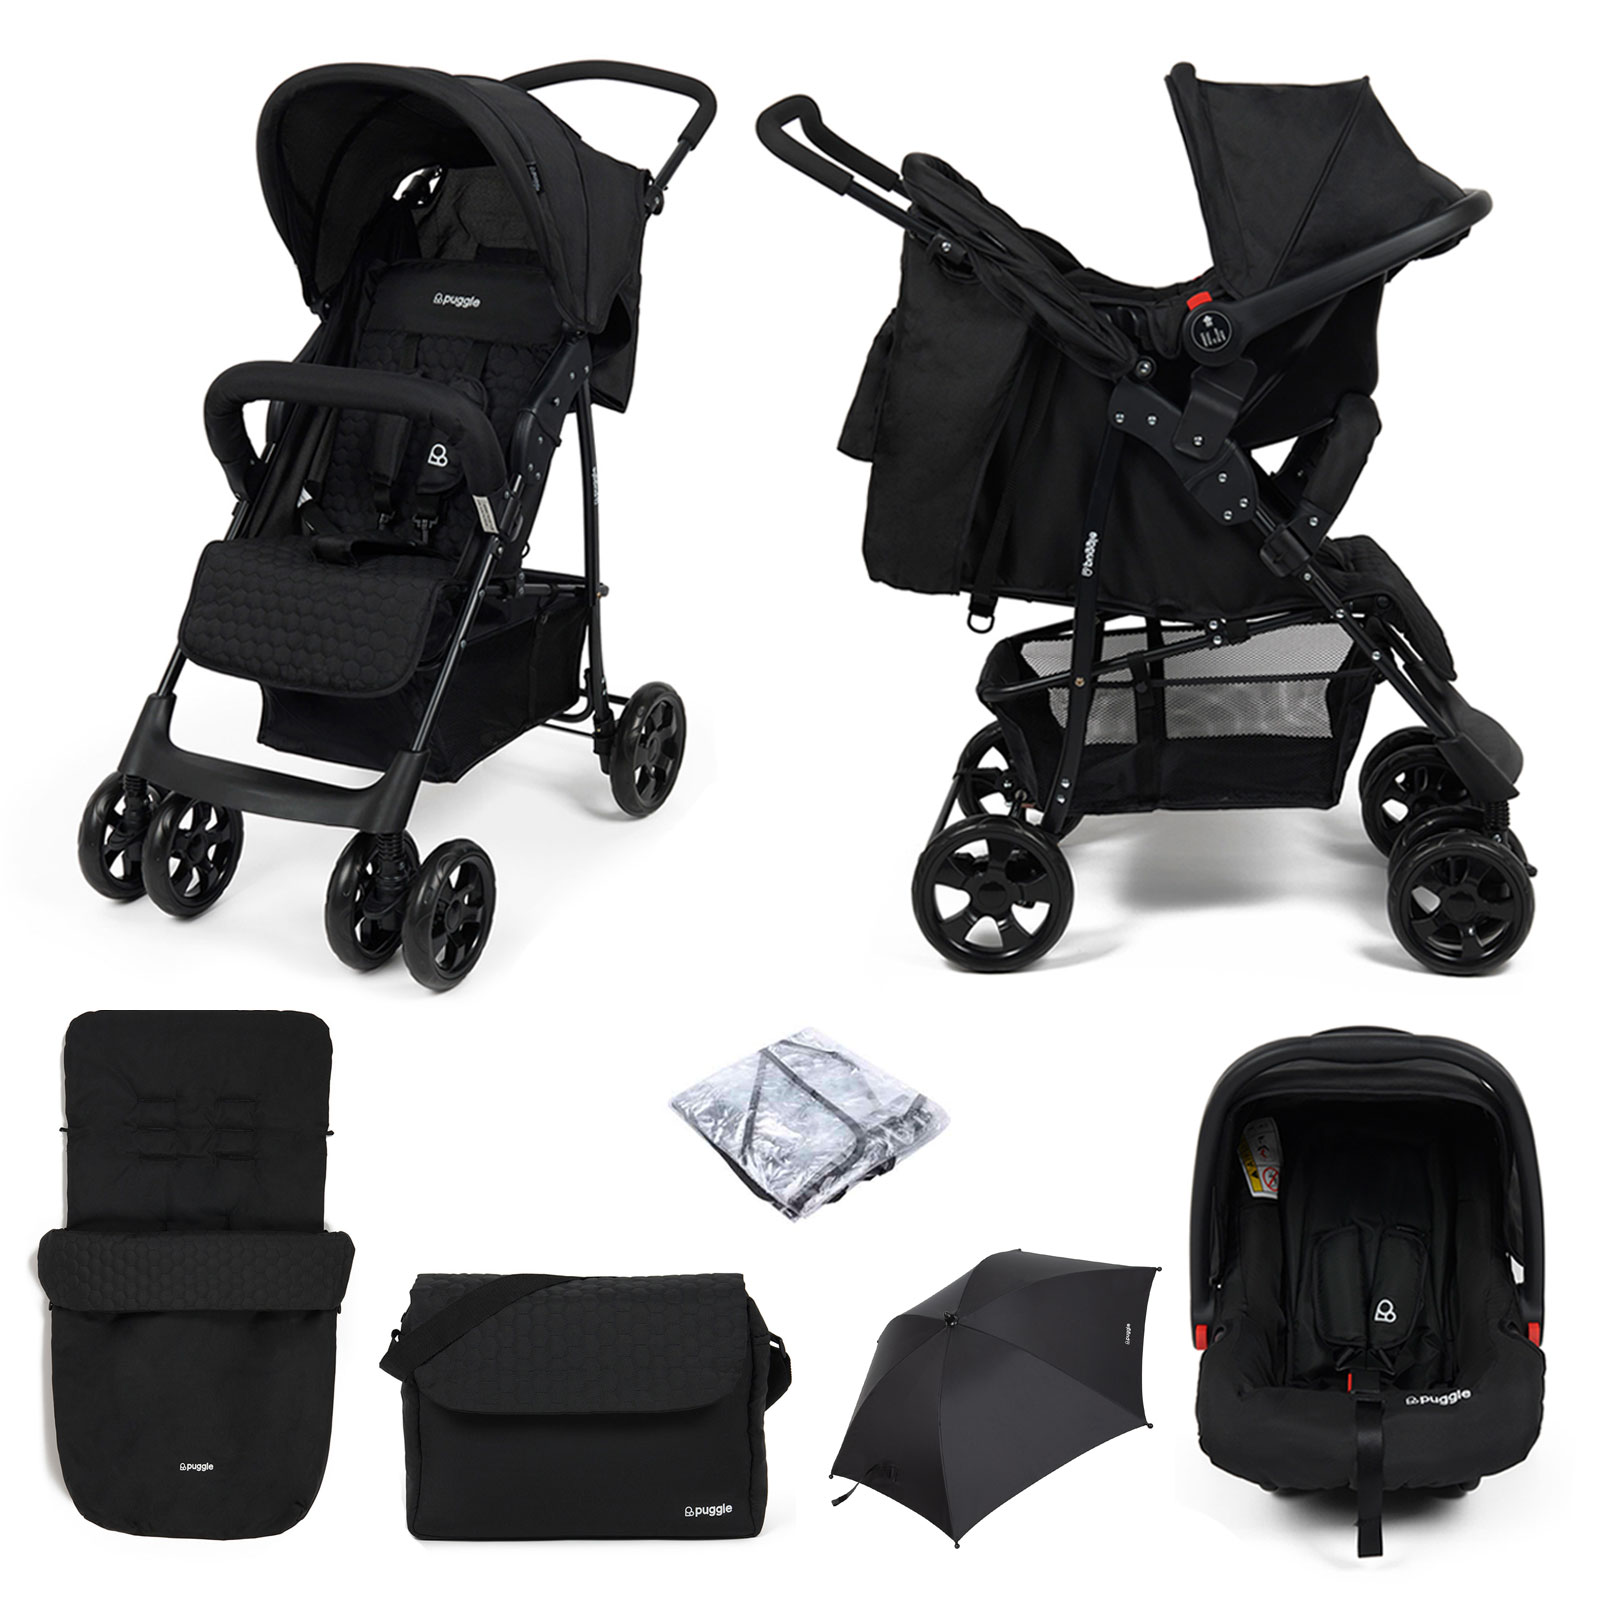 Puggle Lowton Luxe 2in1 Travel System with Raincover, Universal Honeycomb Footmuff, Changing Bag & Parasol – Storm Black